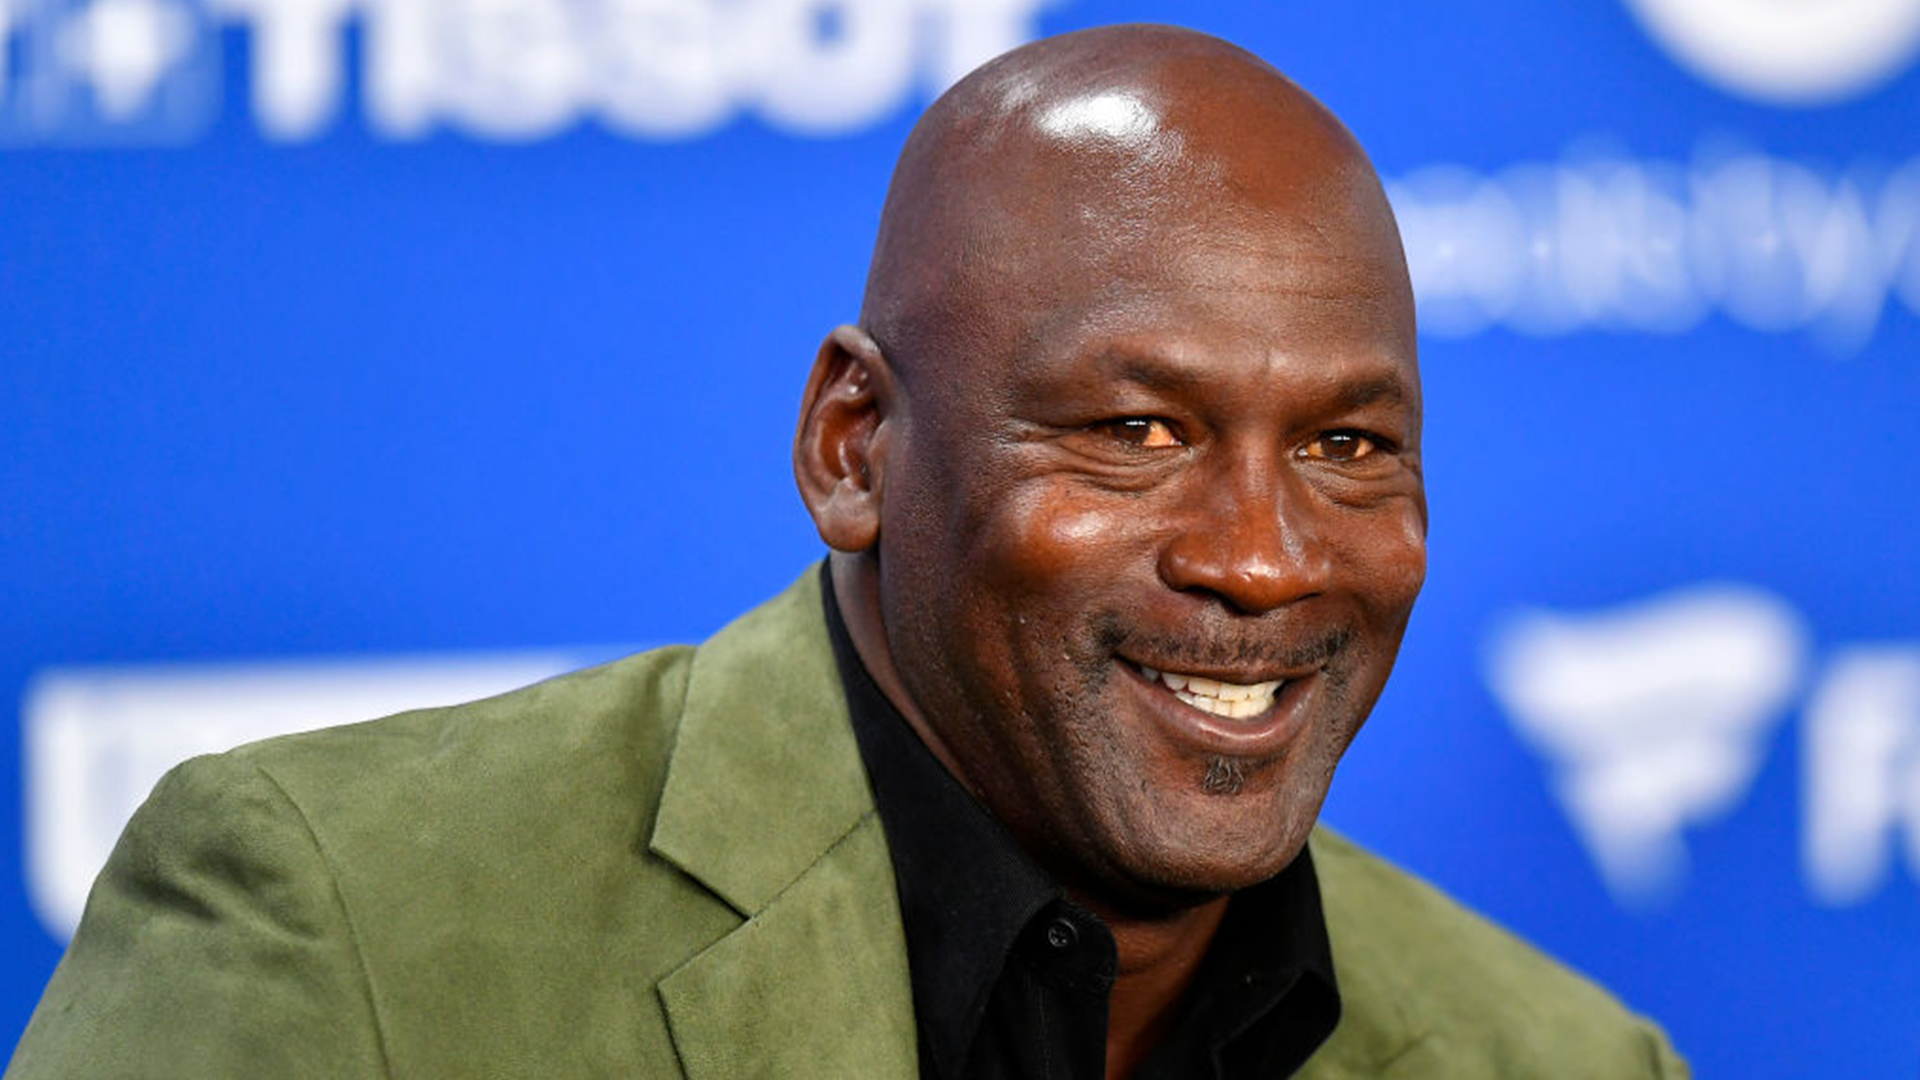 Here's Why Michael Jordan Once Turned Down $100M For A Two-Hour Appearance